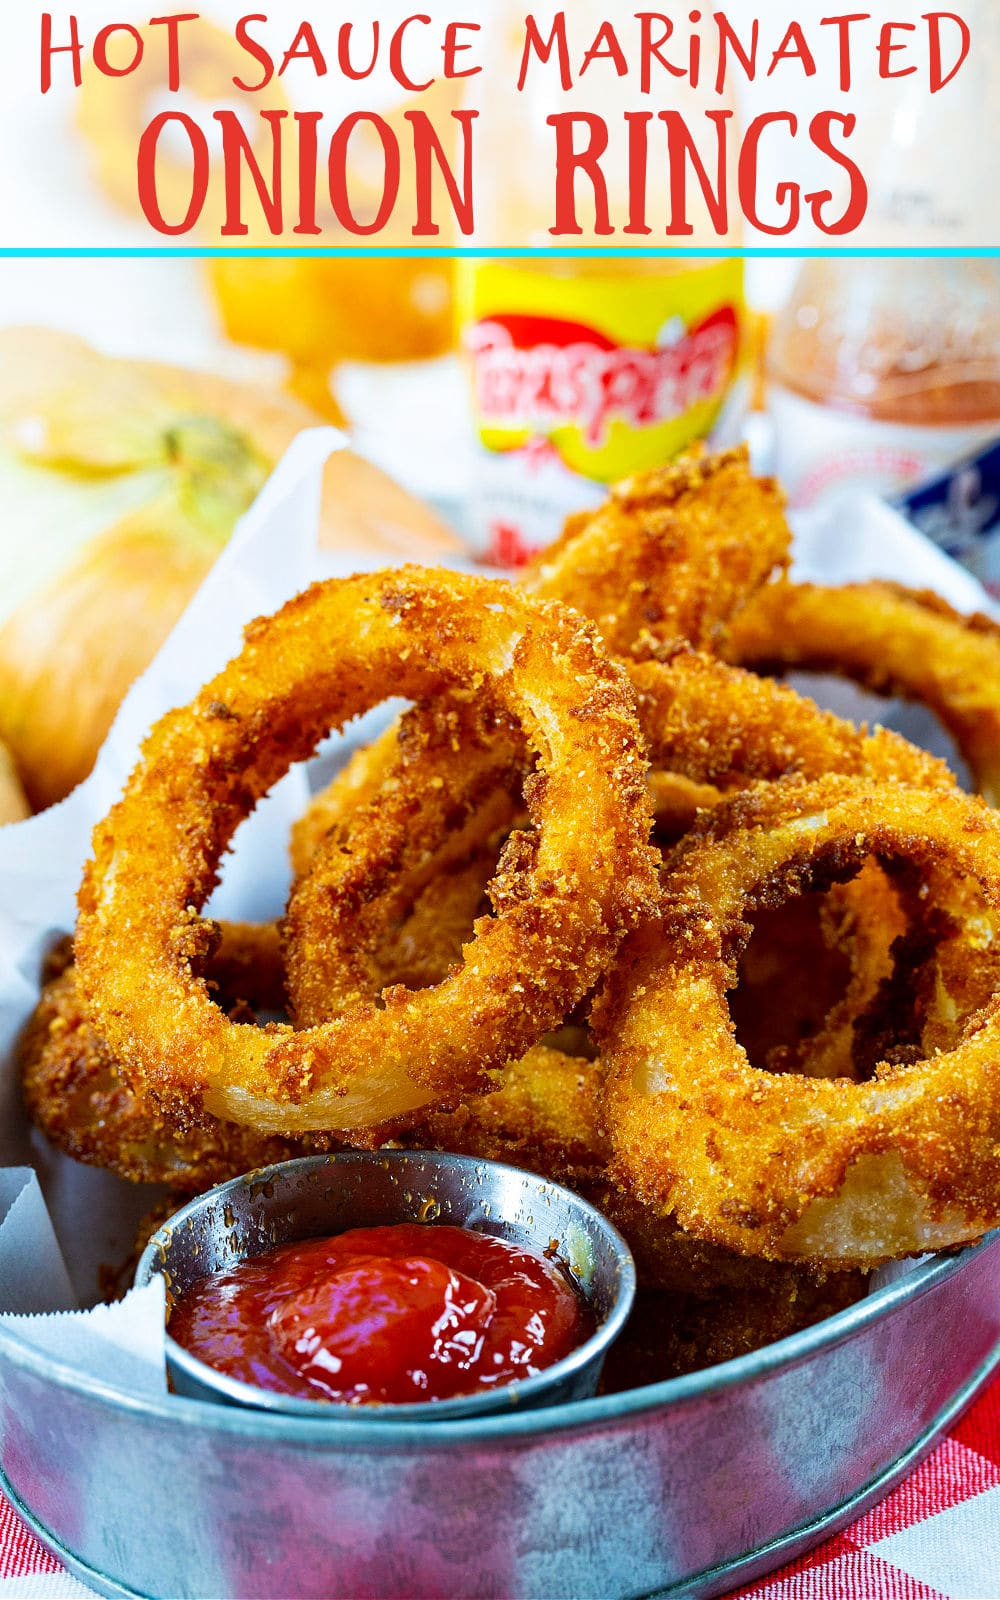 Hot Sauce Marinated Onion Rings in metal container with ketchup.